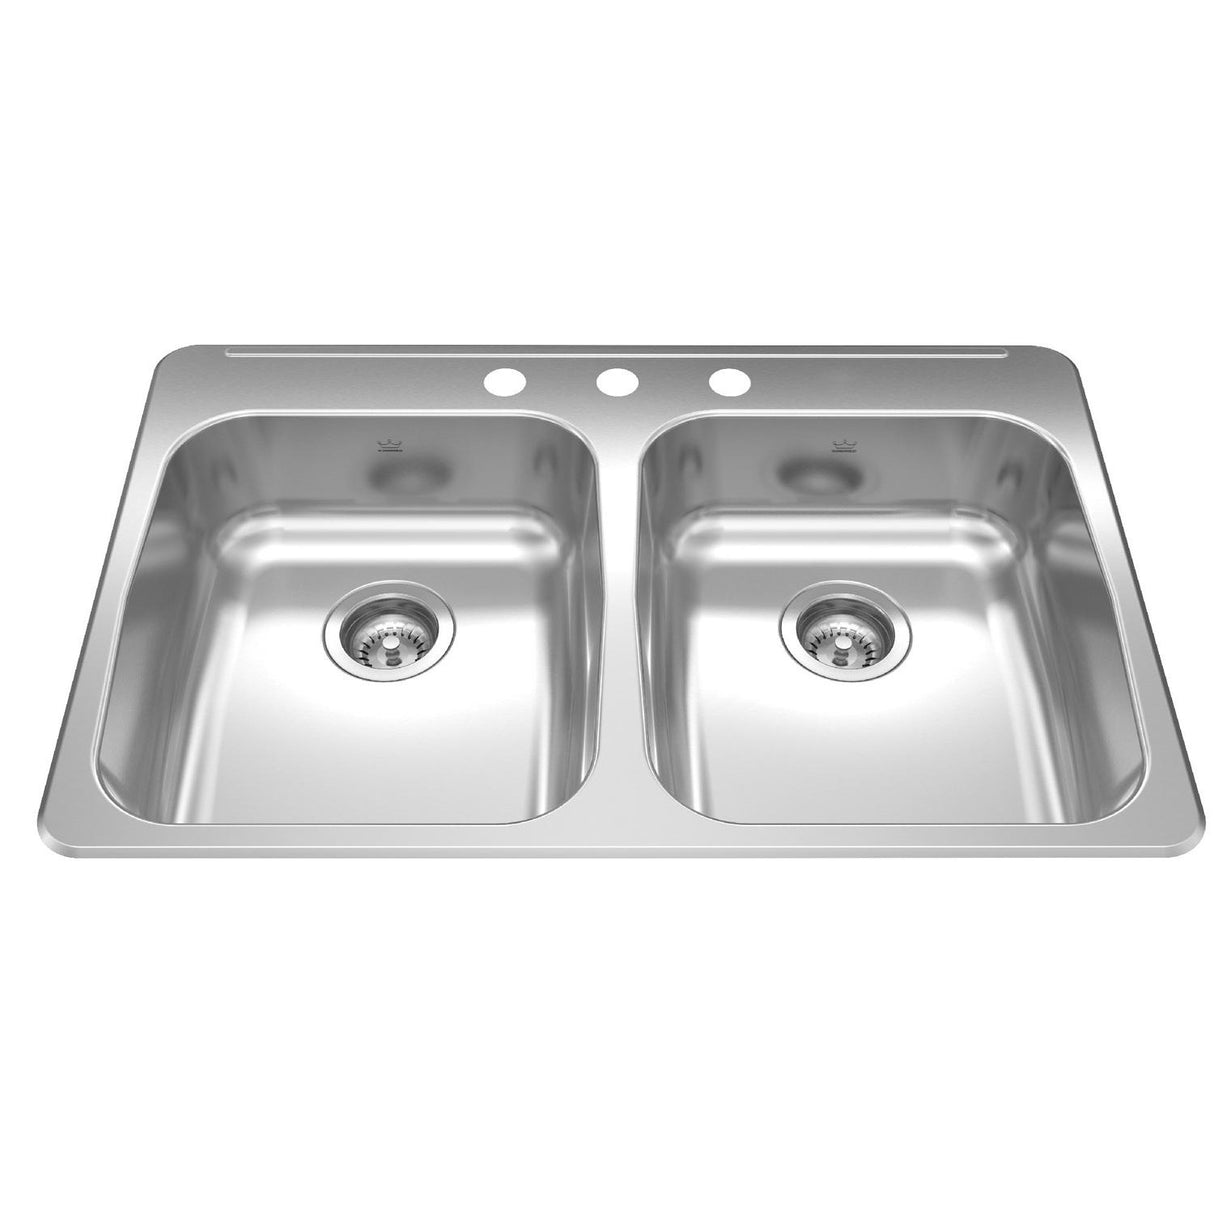 KINDRED RDLA3322-55-3N Reginox 33.38-in LR x 22-in FB x 5.5-in DP Drop In Double Bowl 3-Hole Stainless Steel Kitchen Sink In Satin Finish